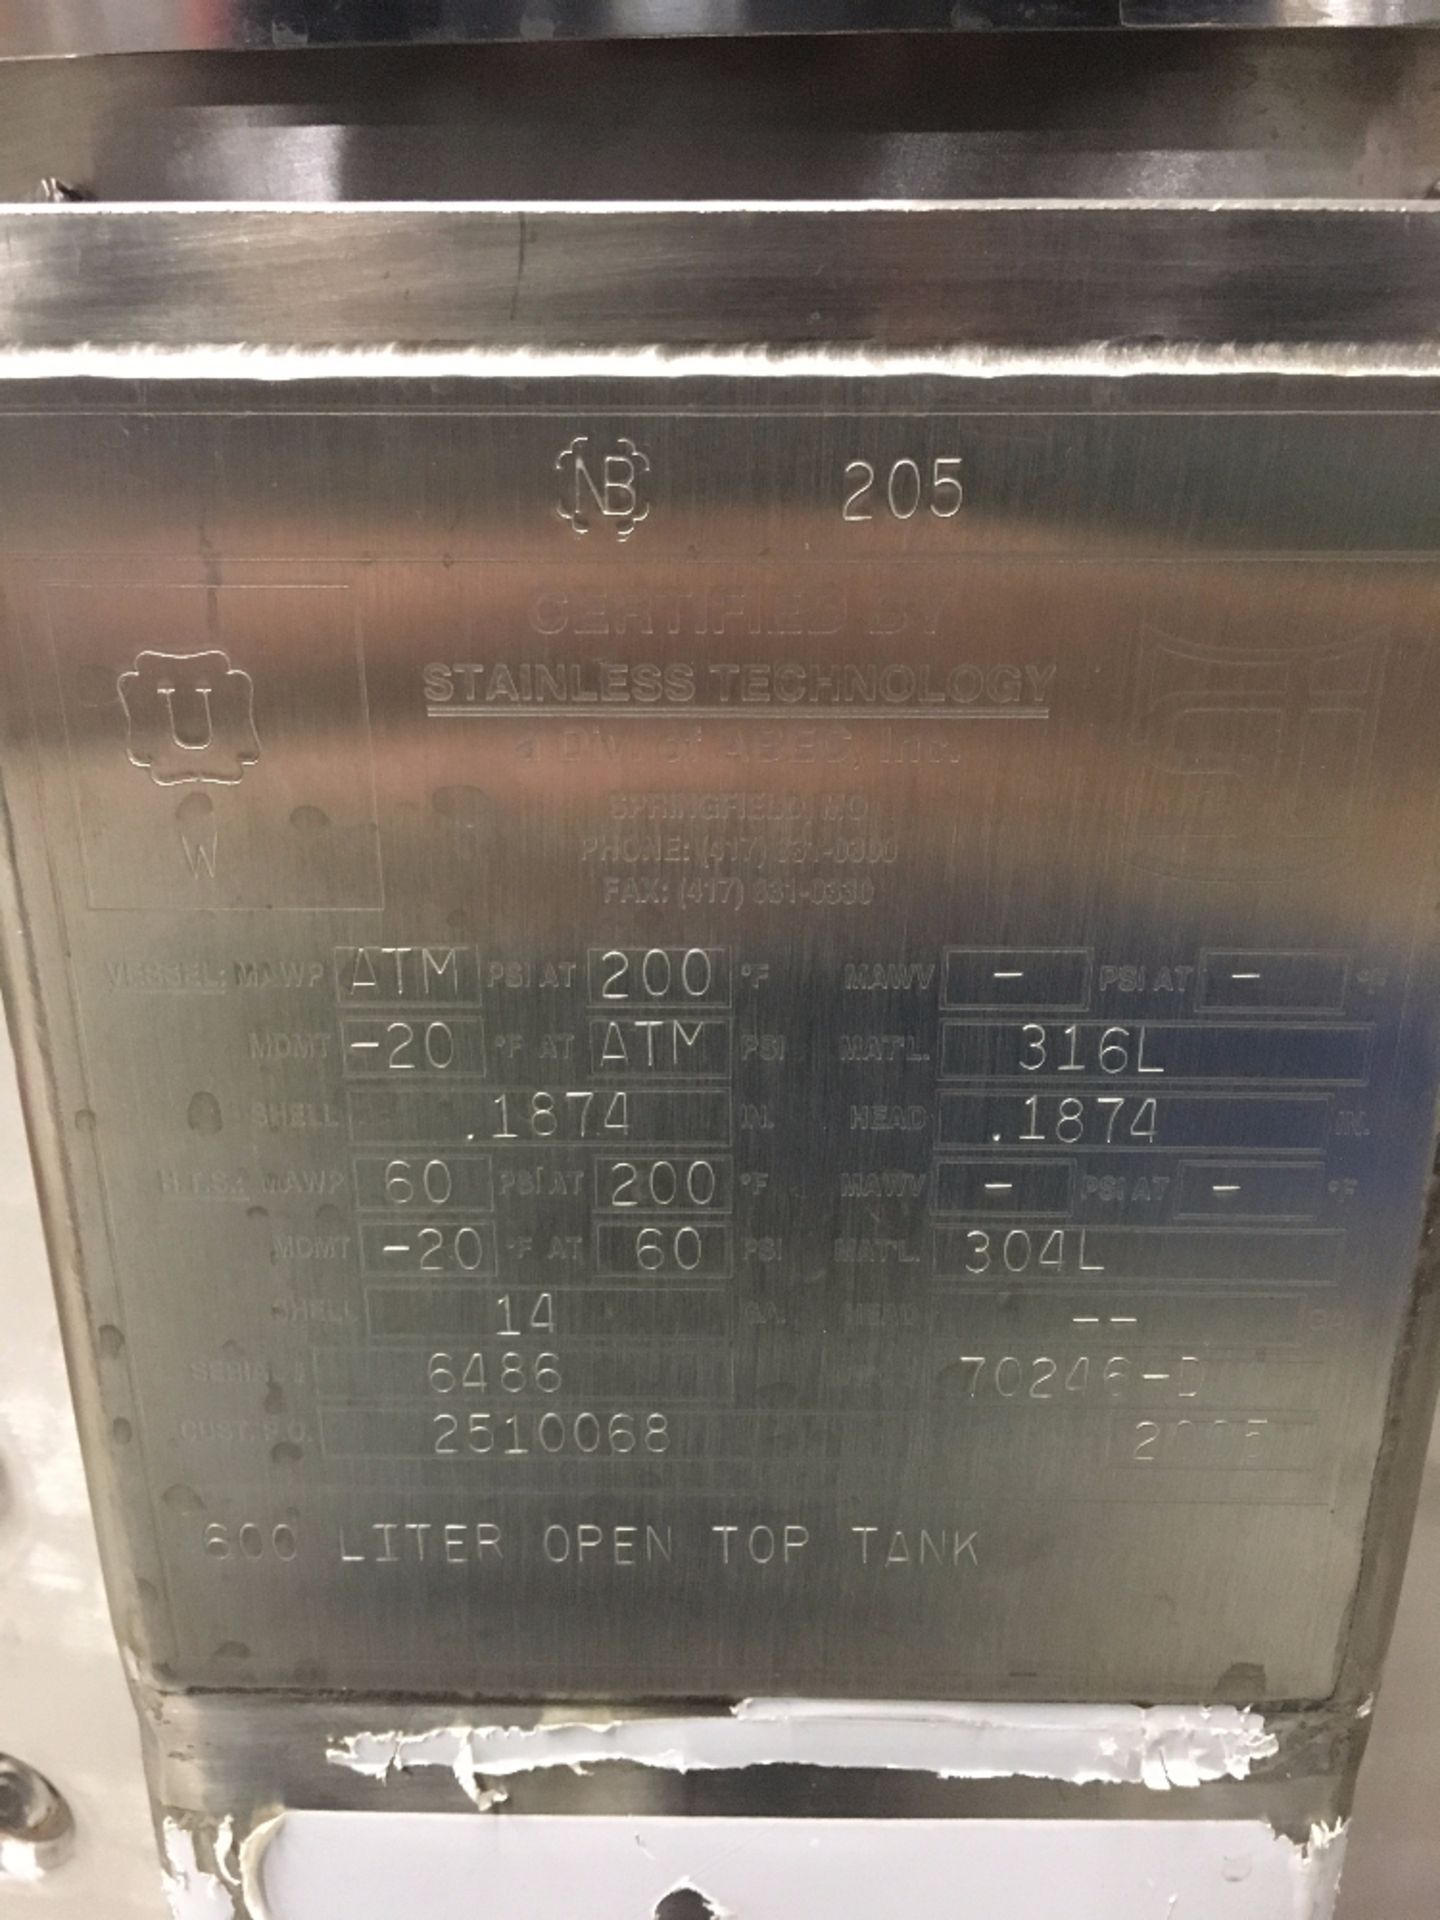 Stainless Technology 300 Liter Tank - Image 2 of 6